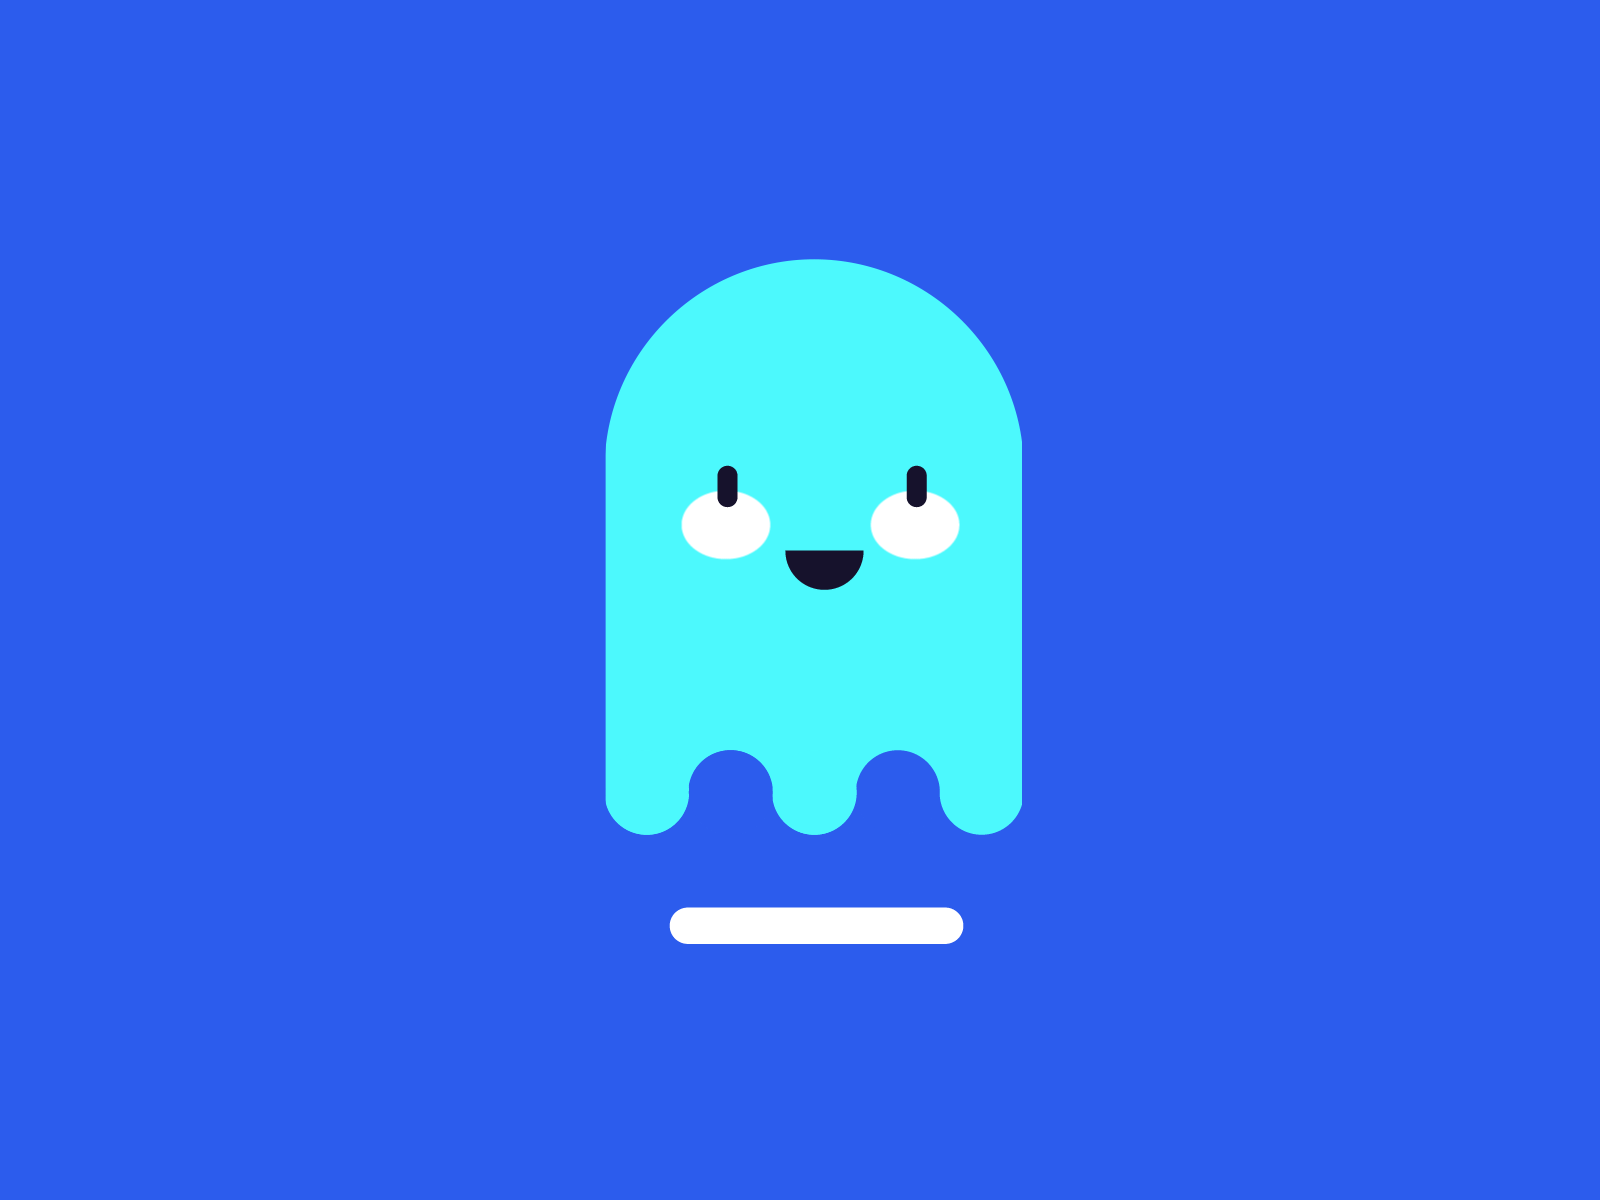 Flying Ghost designs, themes, templates and downloadable graphic elements  on Dribbble